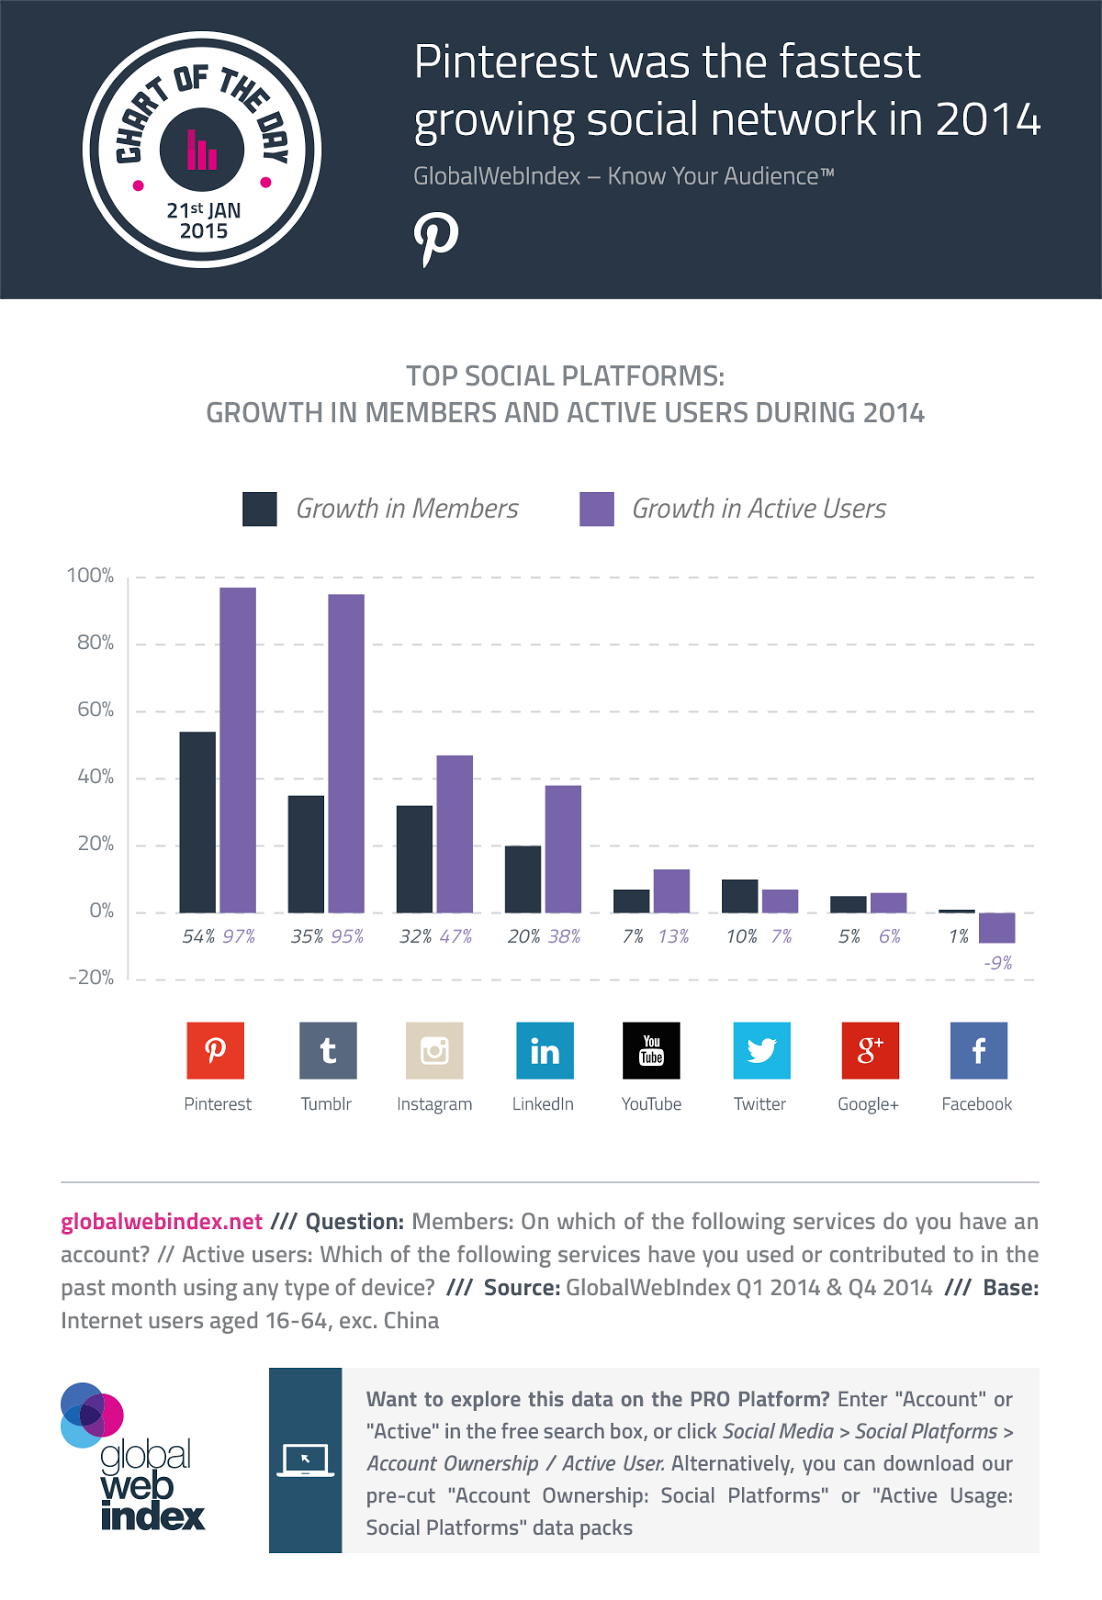 Tumblr and Pinterest now fastest-growing social media platforms - #infographic